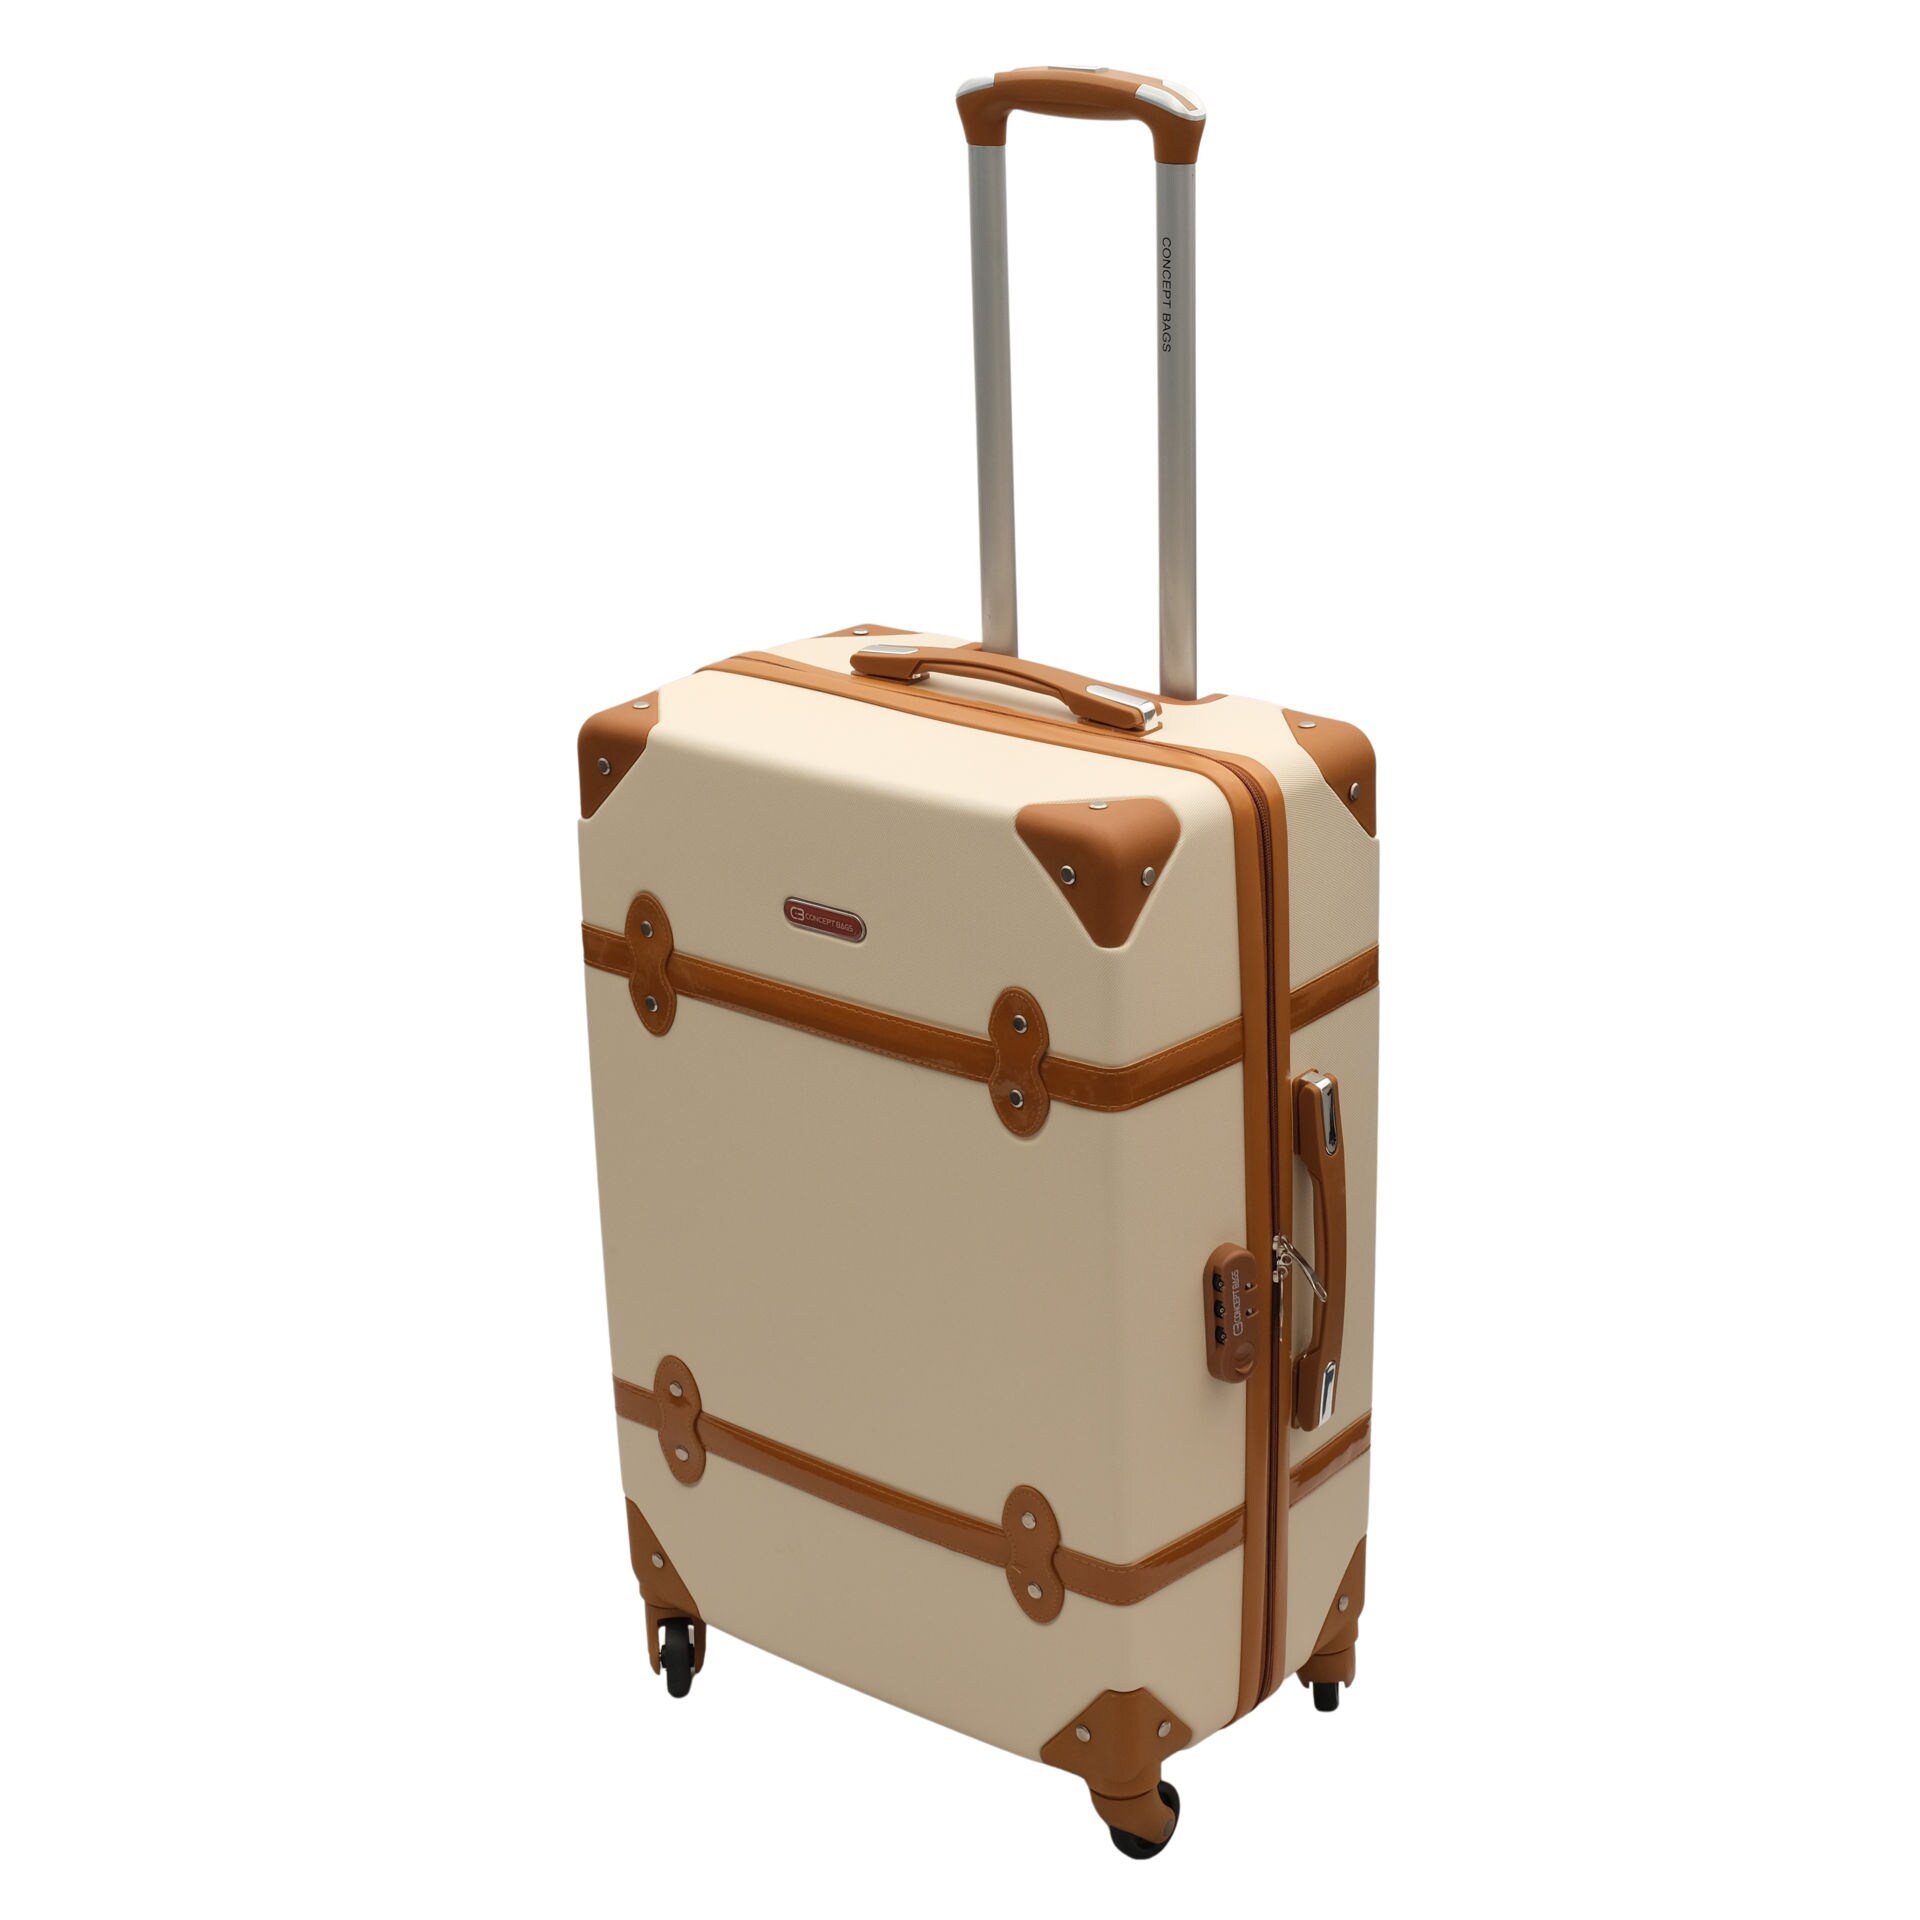 Shop Concept Bags Hard Case Trolley Luggage, Set of 4, Beige | Dragon ...